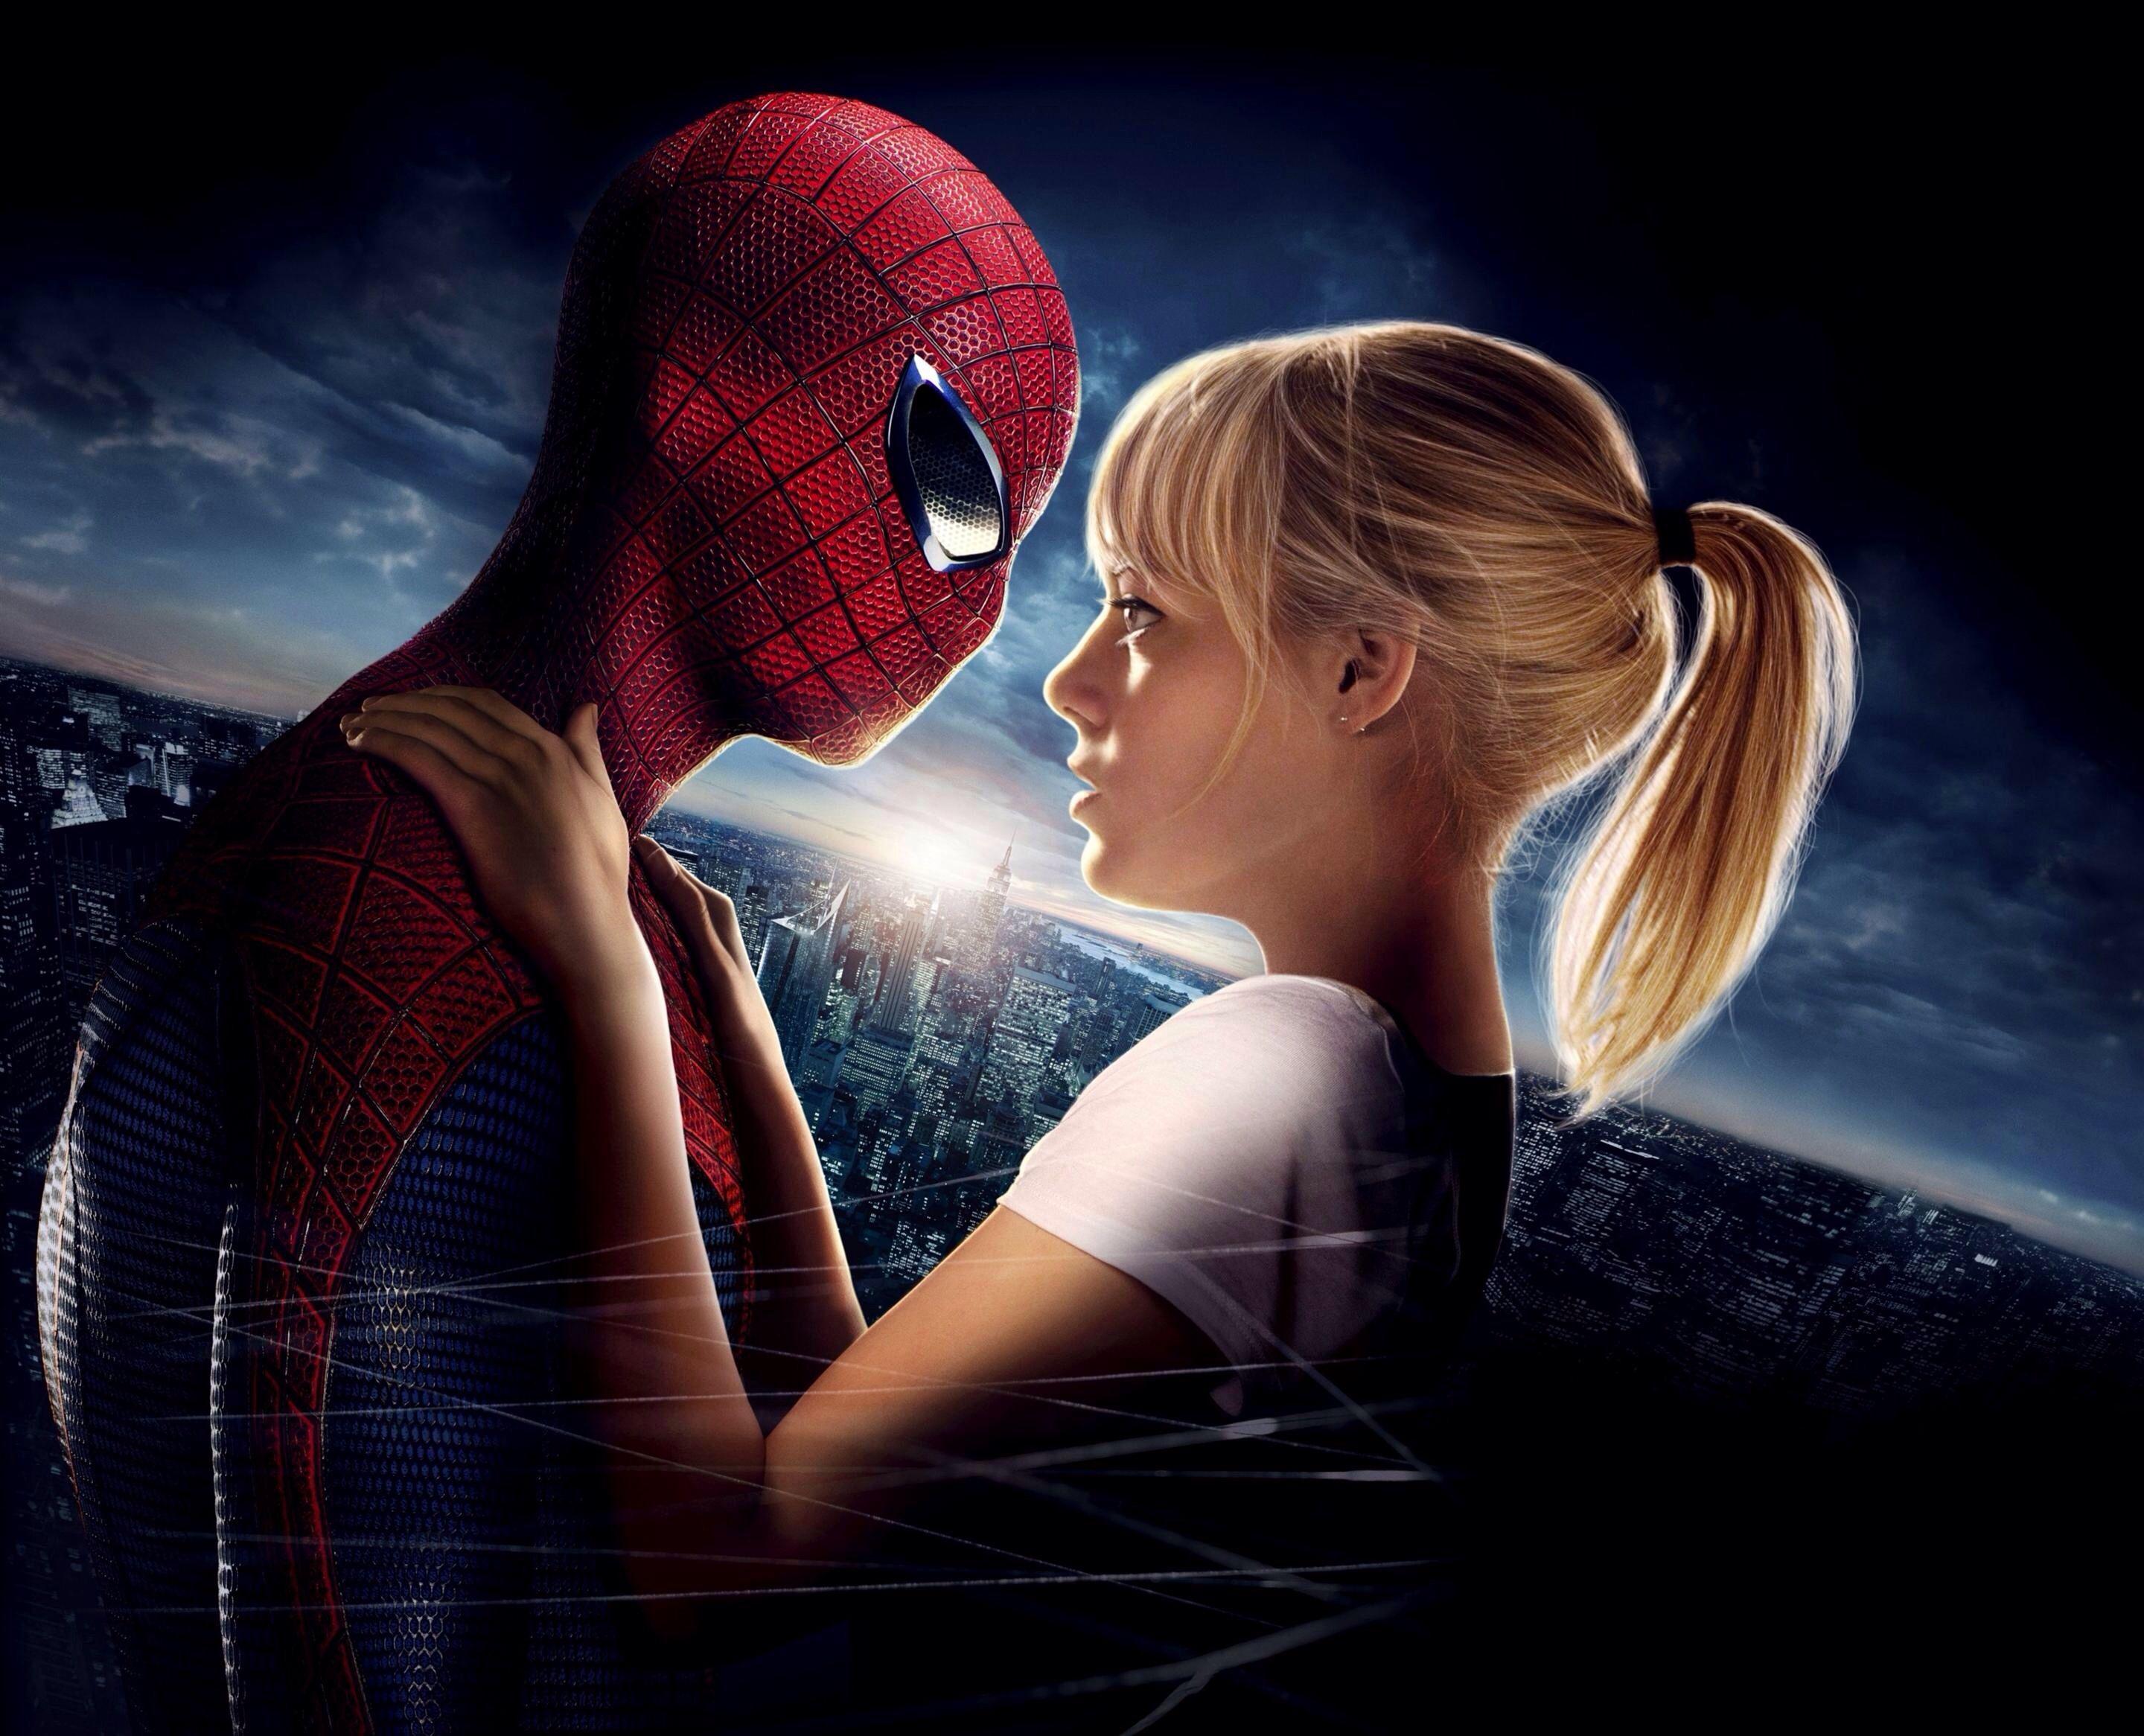 The amazing spiderman 2 poster Gwen and peter